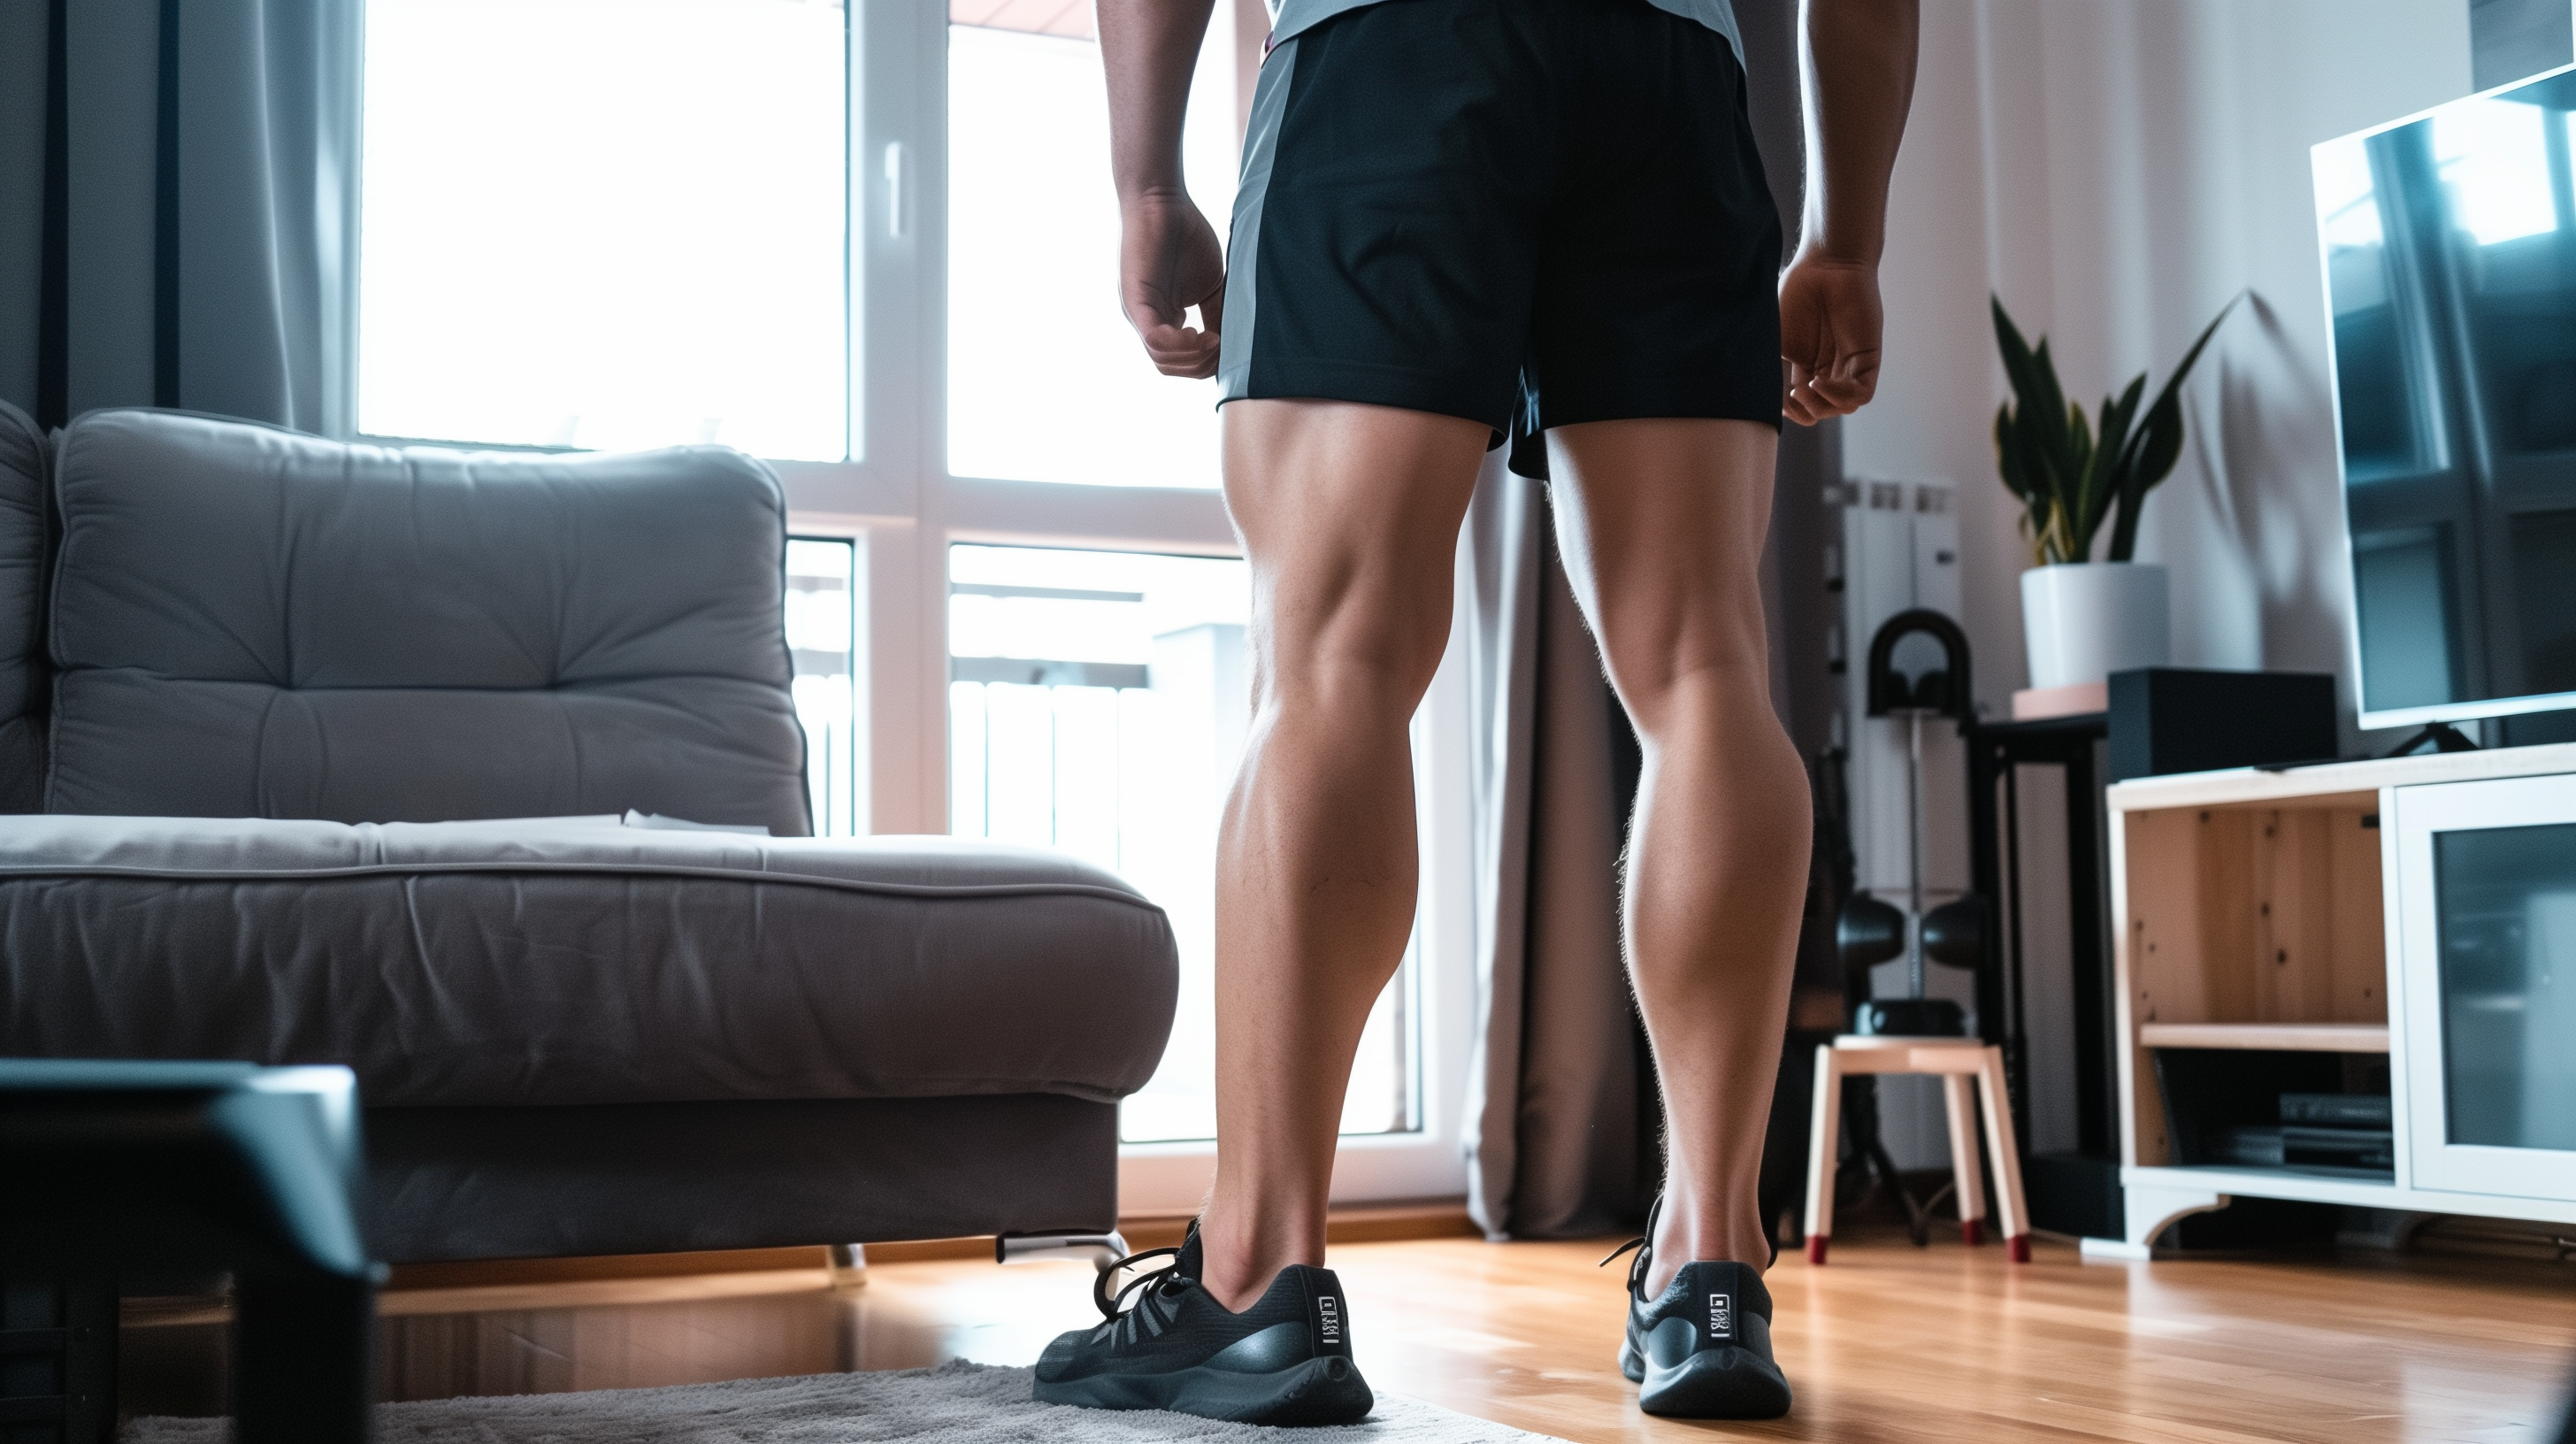 a man's muscular legs in workout shorts; he's standing in his living room about to workout